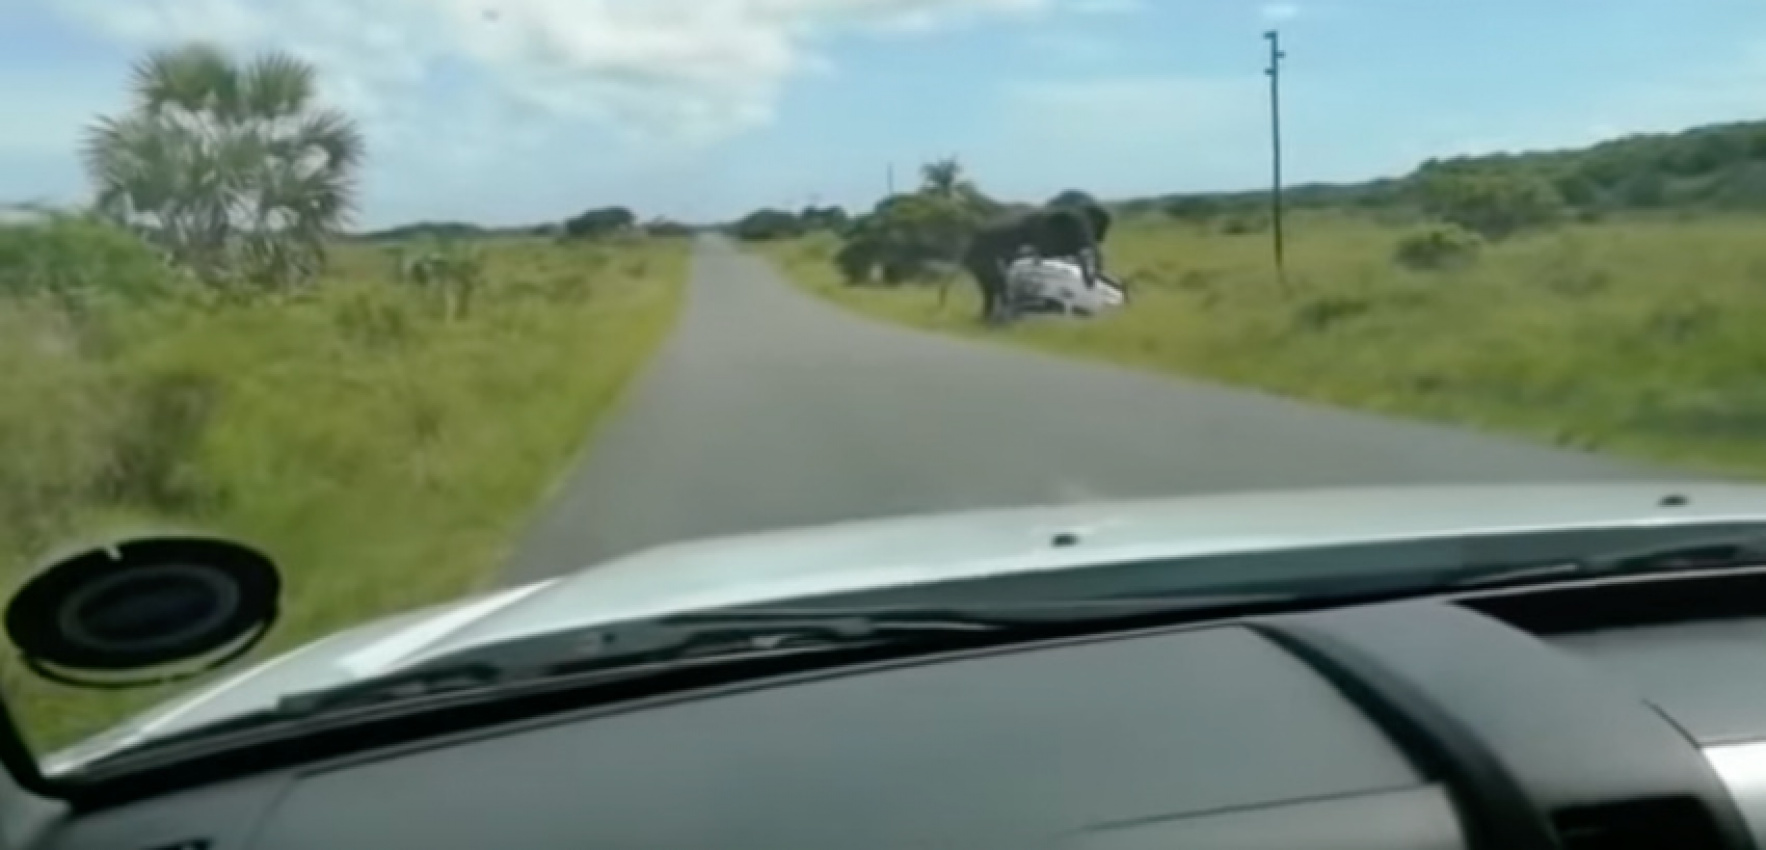 autos, cars, ford, car accidents, annoyed elephant tosses a ford suv around like a toy at african nature preserve